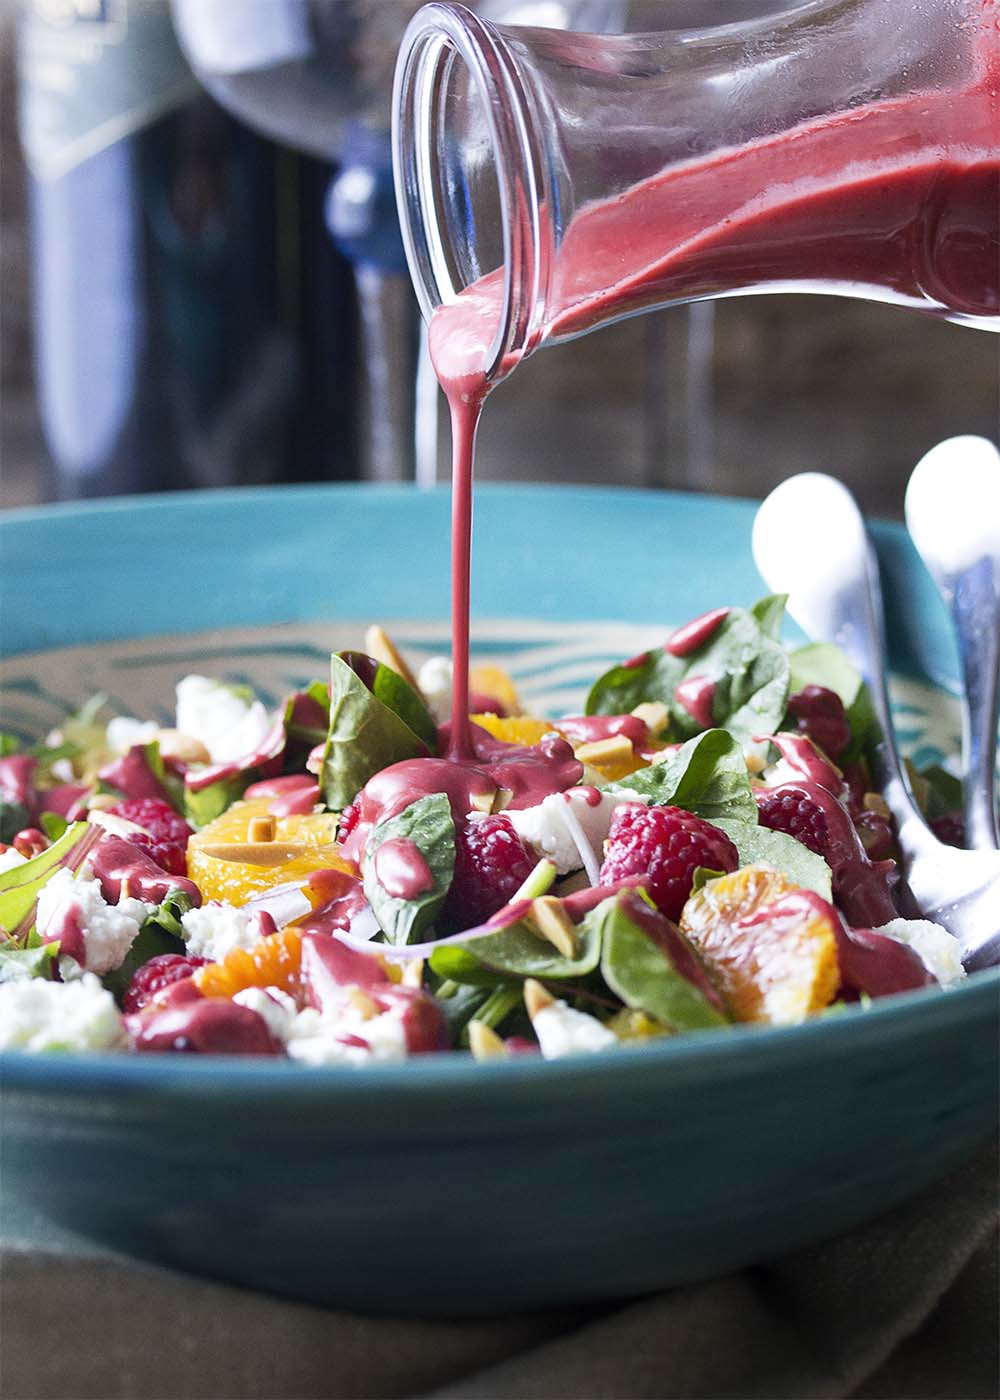 Thick, deep pink raspberry vinaigrette being poured over a large serving bowl full of mixed greens and raspberry salad.